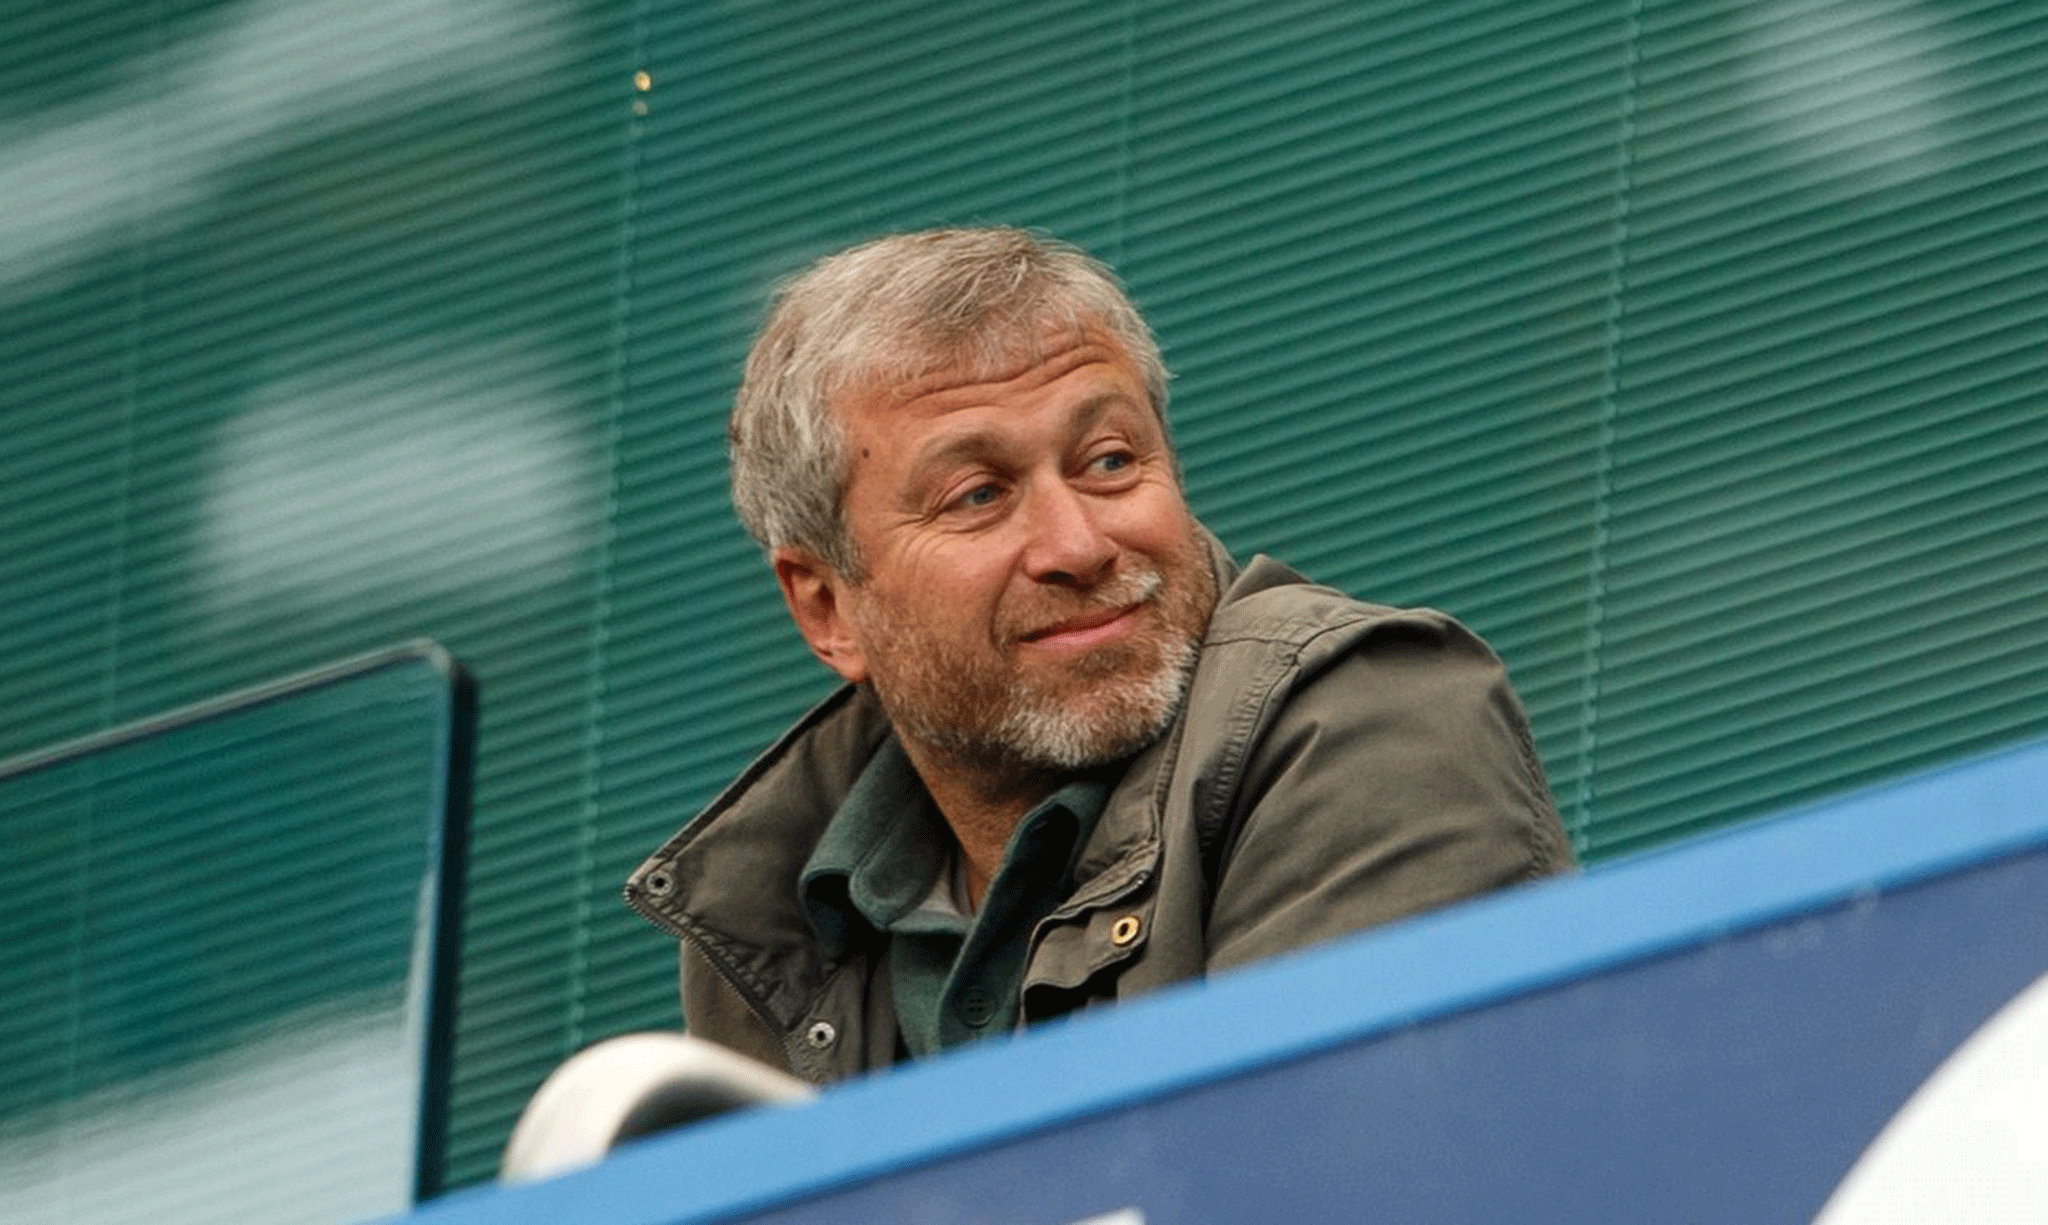 Billionaire Chelsea owner Roman Abramovich is one of over 100,000 wealthy individuals who benefits from 'non-domiciled' tax status